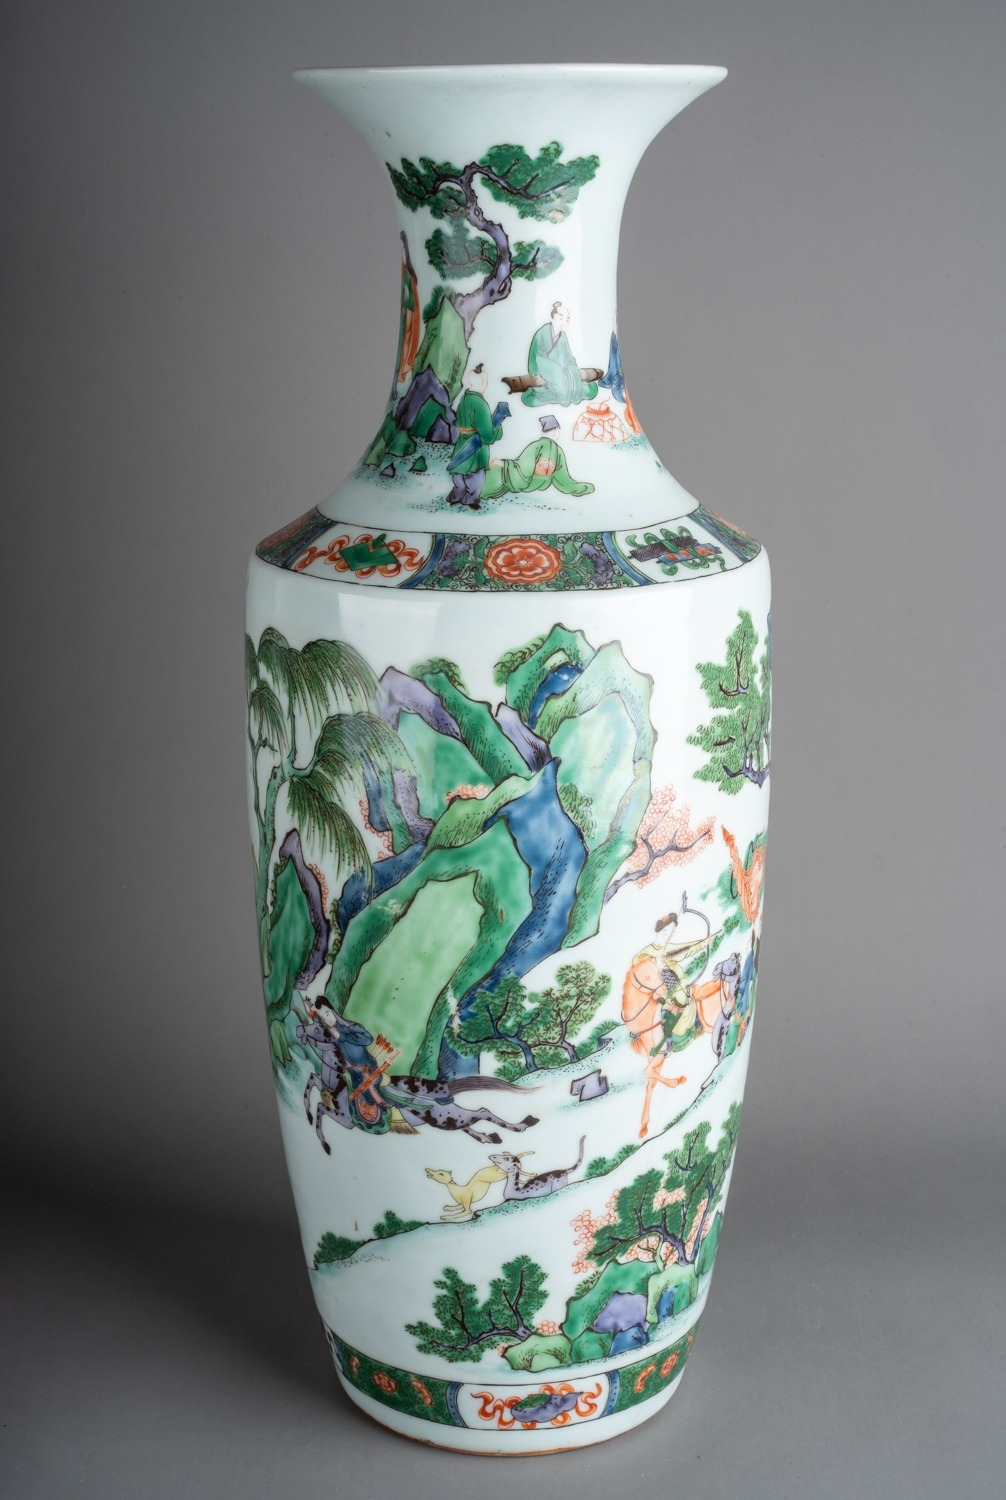 Large antique Chinese Famille Vert porcelain vase finely decorated with figures on horses and camels